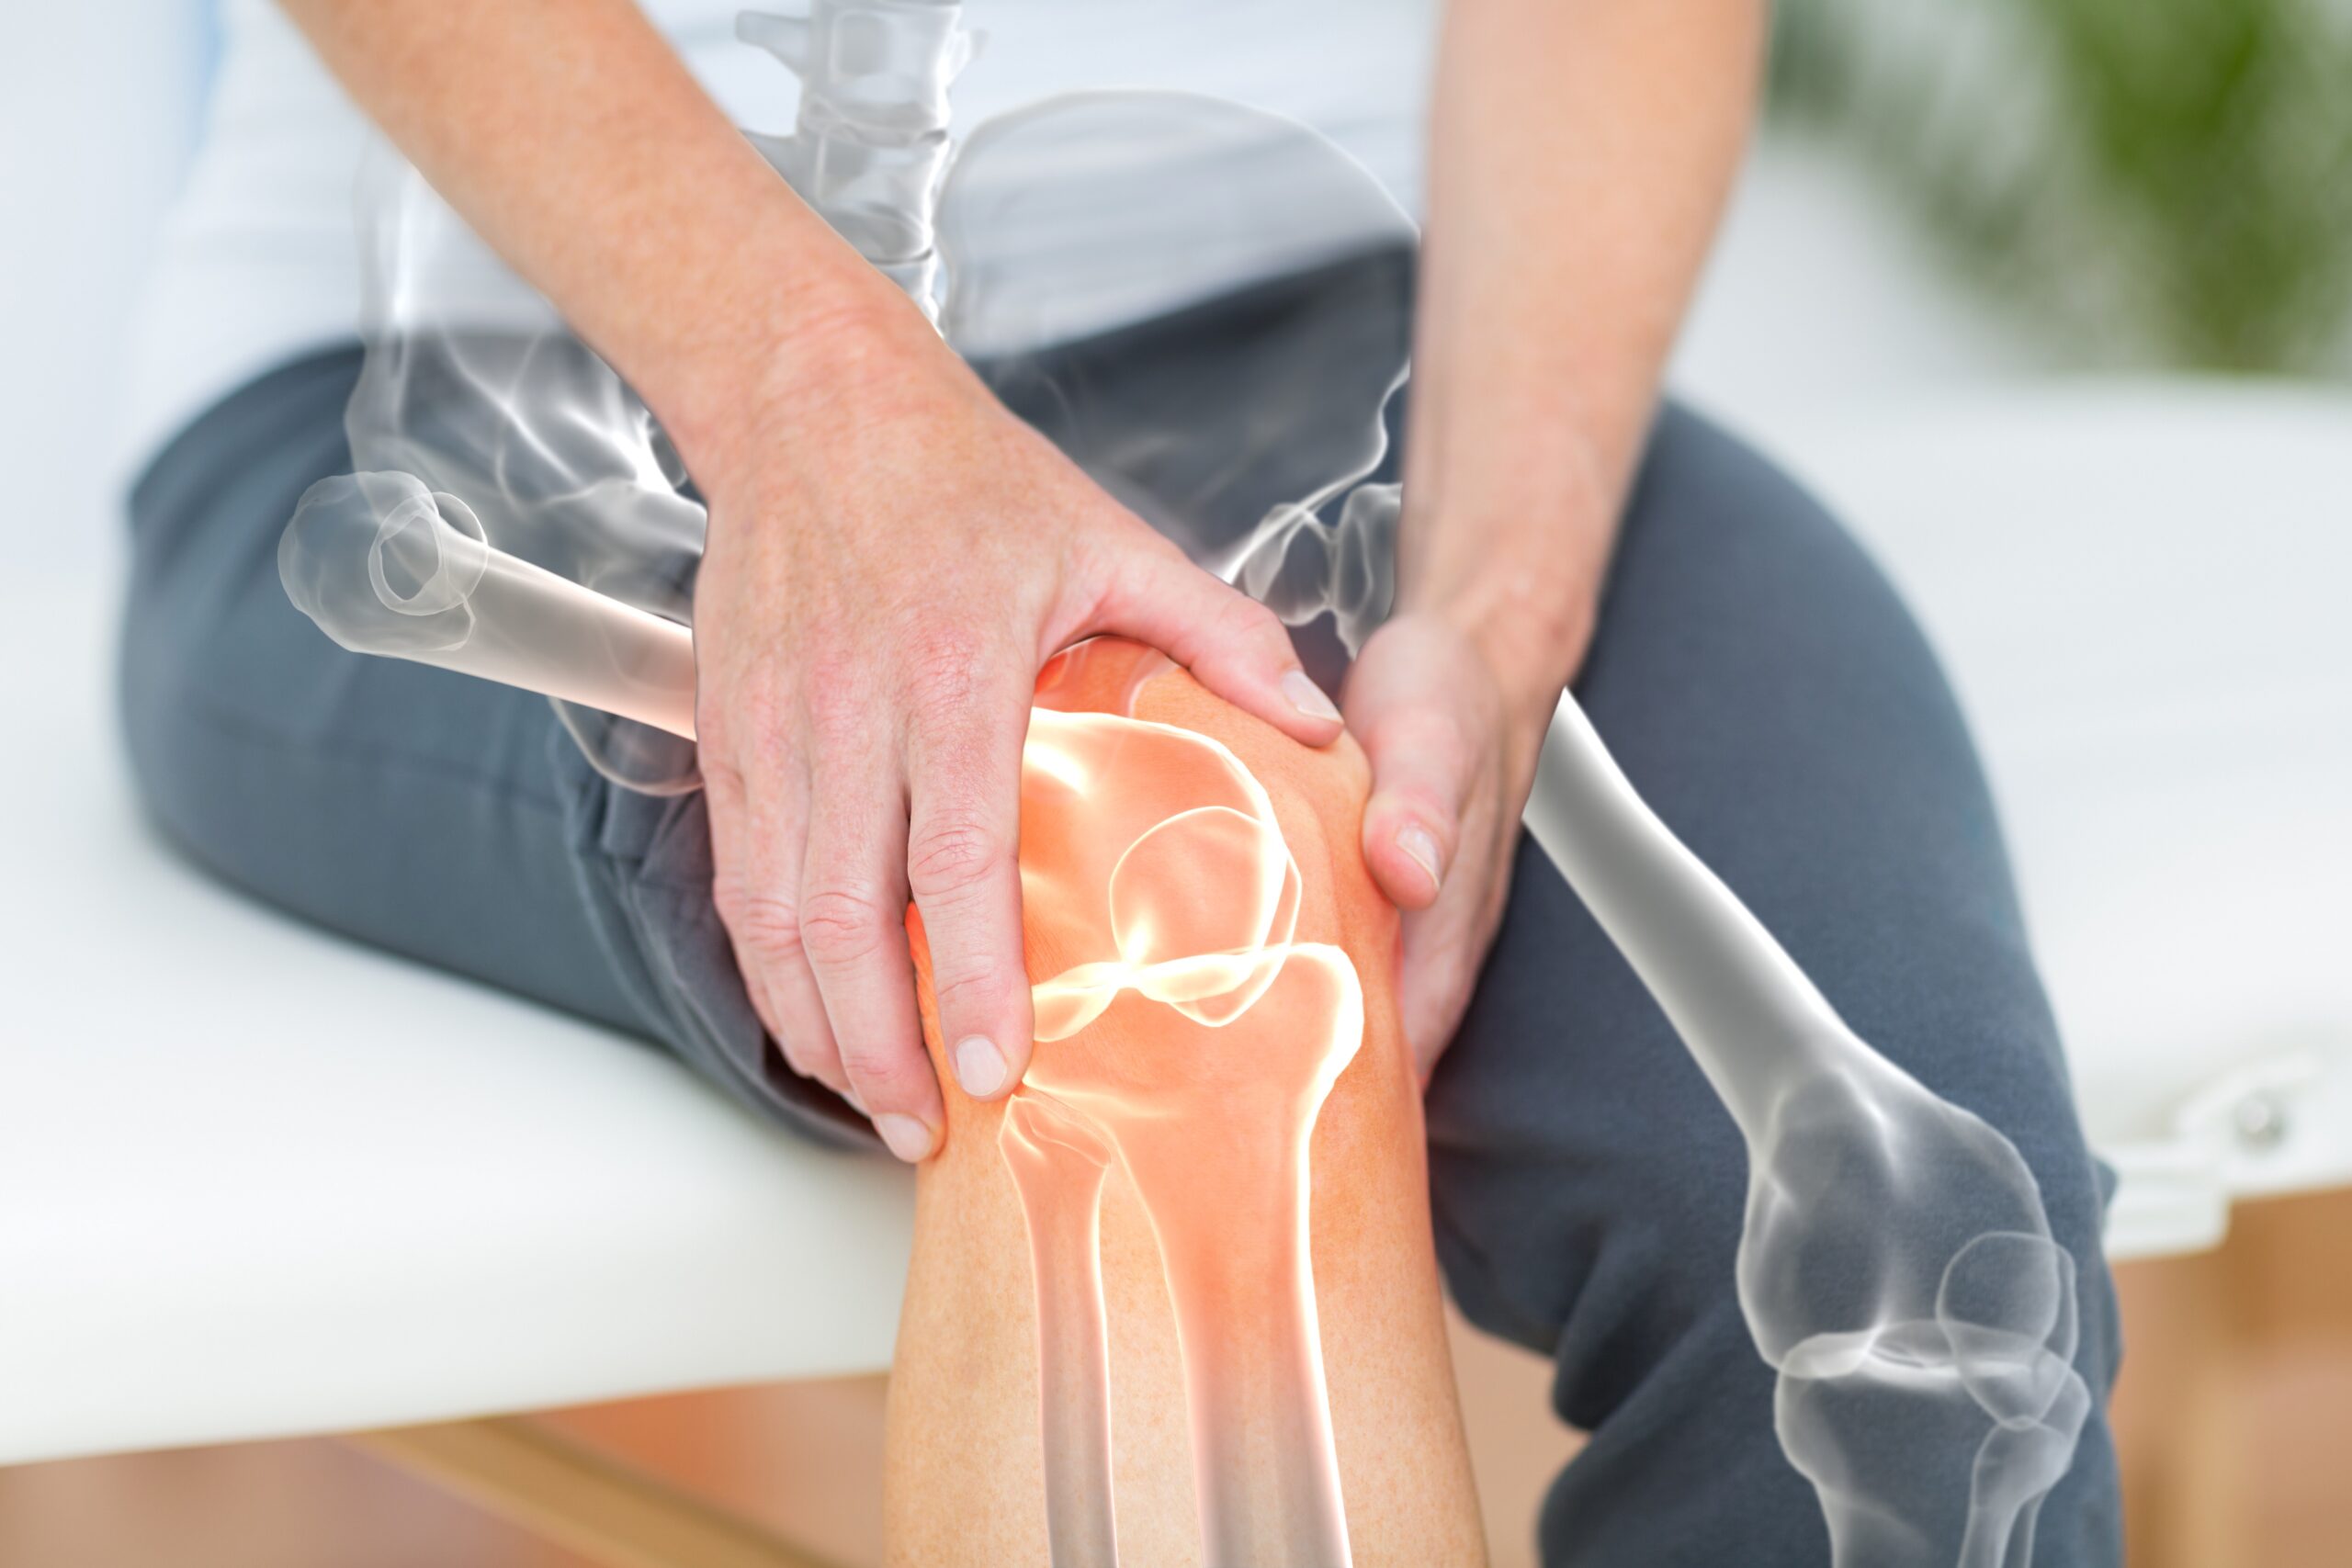 case study on joint pain